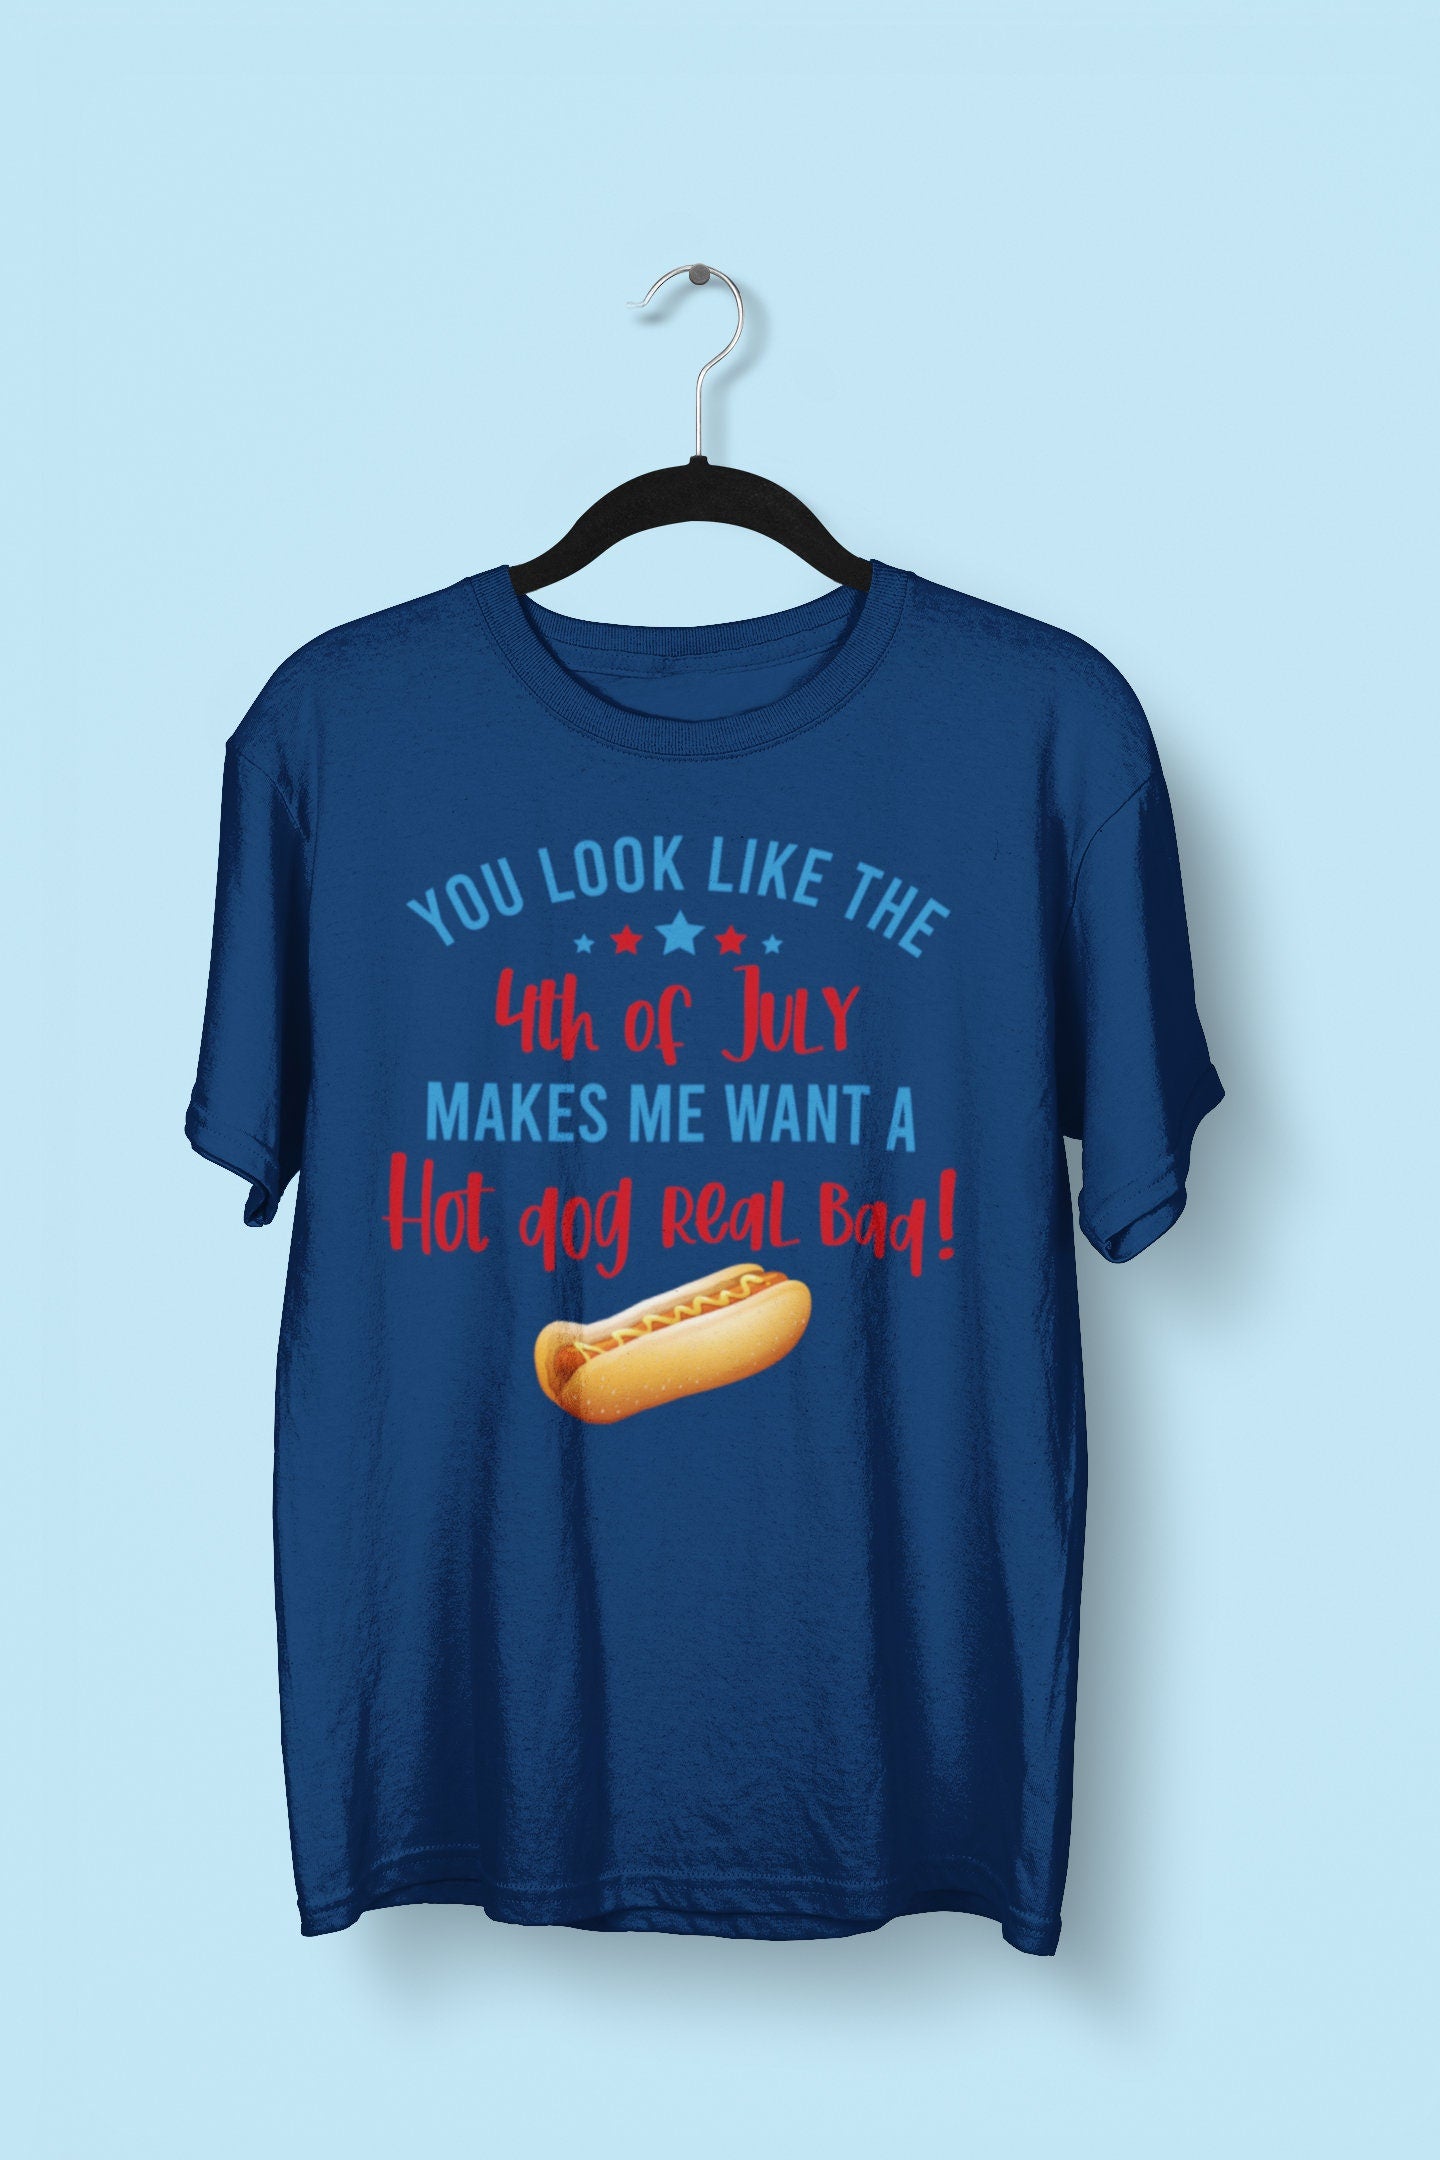 You Look Like the 4th of July, Makes me Want a hot dog real bad! - Fourth of July summer tank top/ t-shirt